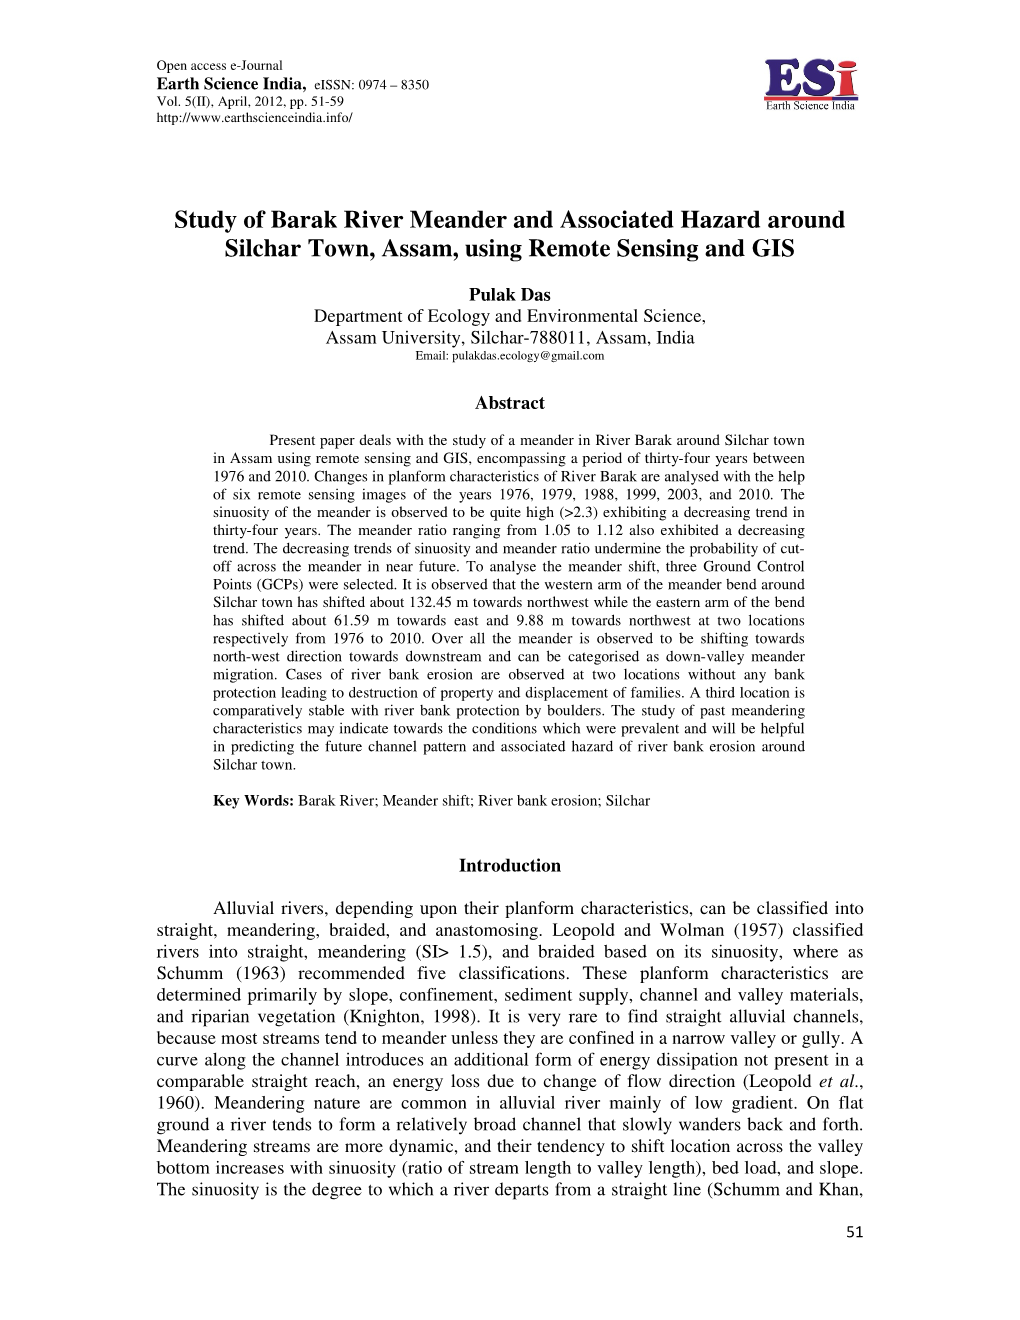 Study of Barak River Meander and Associated Hazard Around Silchar Town, Assam, Using Remote Sensing and GIS